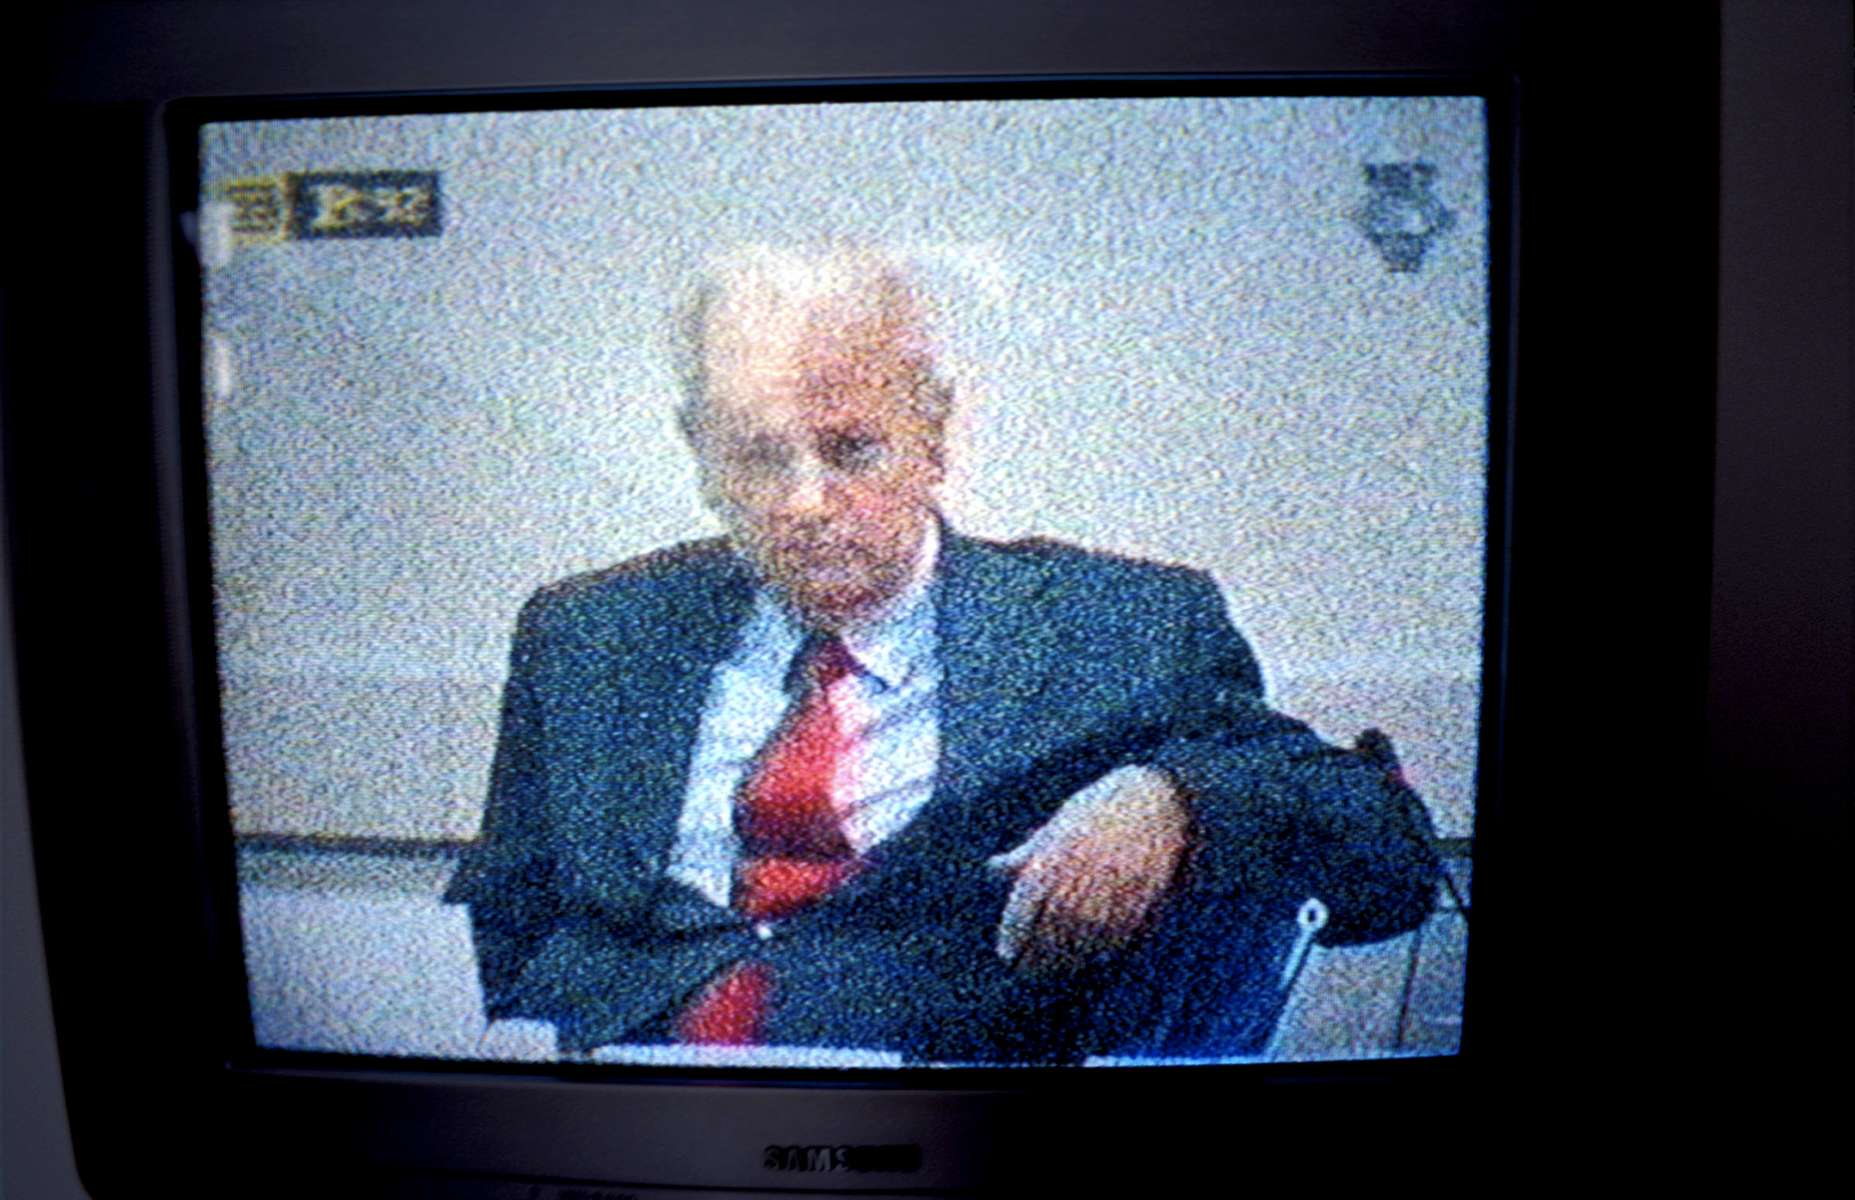 Televised proceedings of the trial of Slobodan Milosevic, the former president of Serbia, who was handed over to the International Criminal Tribunal for the Former Yugoslavia and sent to the Hague in 2000. Milosevic was indicted in November 2001 for genocide in Bosnia during the war; by early 2005, his trial was still ongoing.